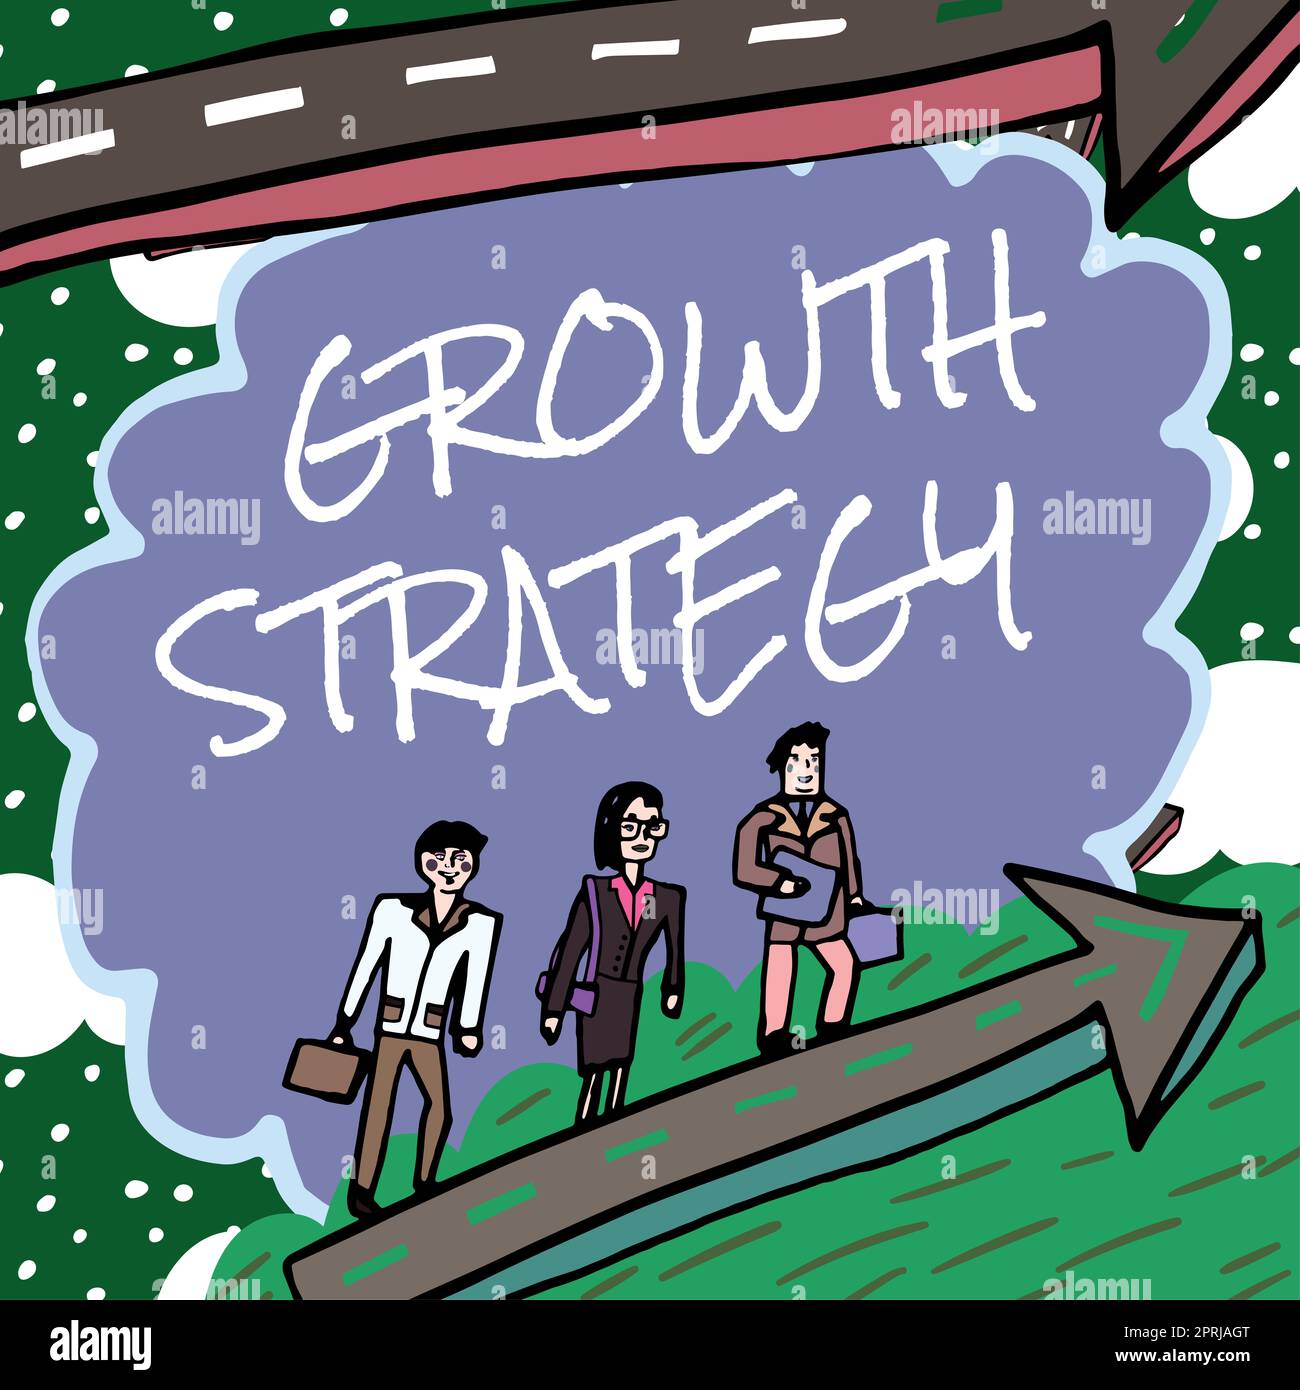 Text showing inspiration Growth StrategyStrategy aimed at winning larger market share in short-term. Business approach Strategy aimed at winning larger market share in shortterm Stock Photo